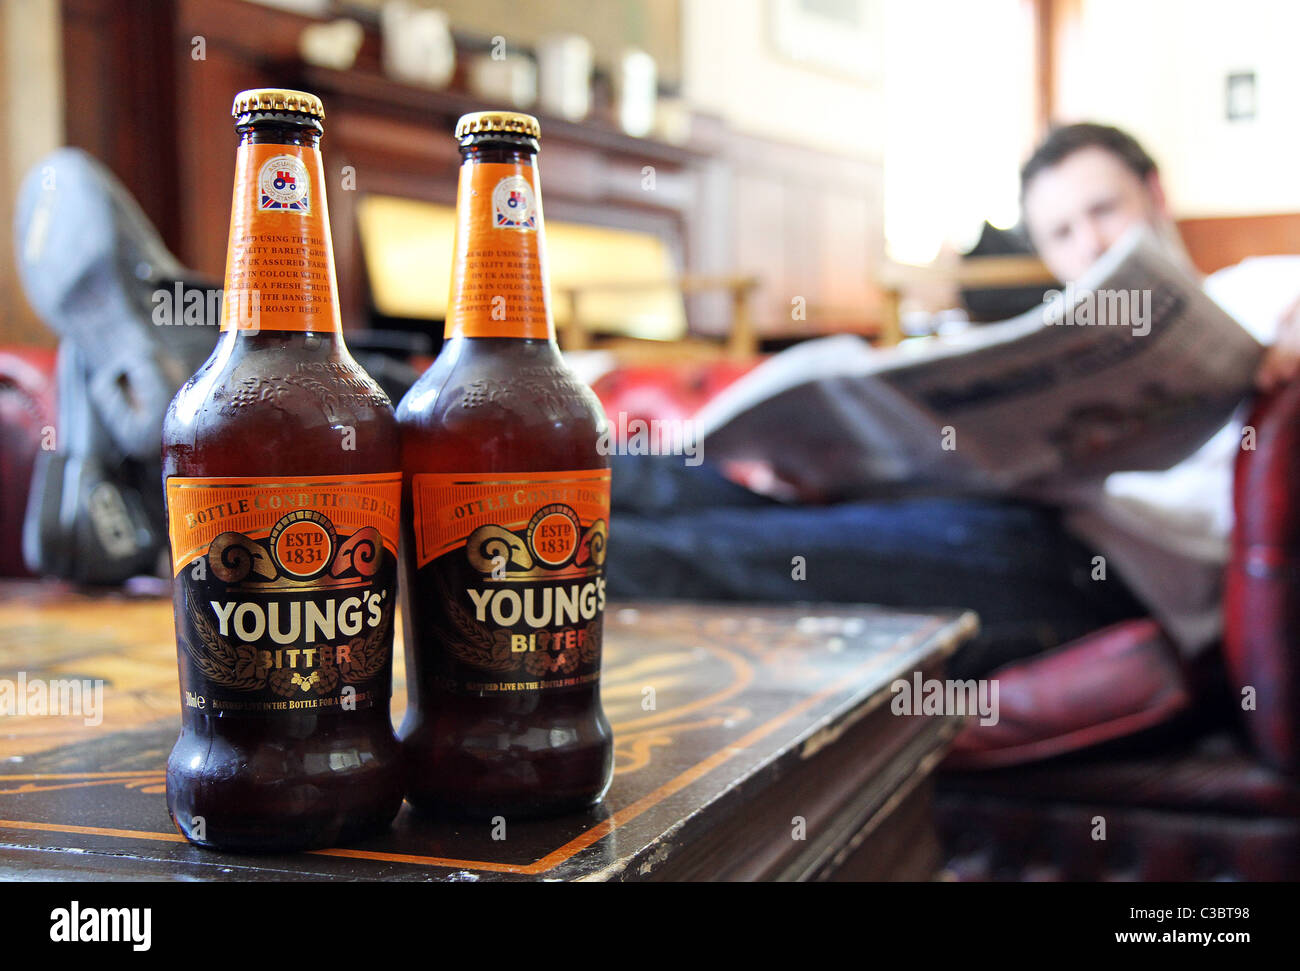 Bottles of Young's bitter. Stock Photo